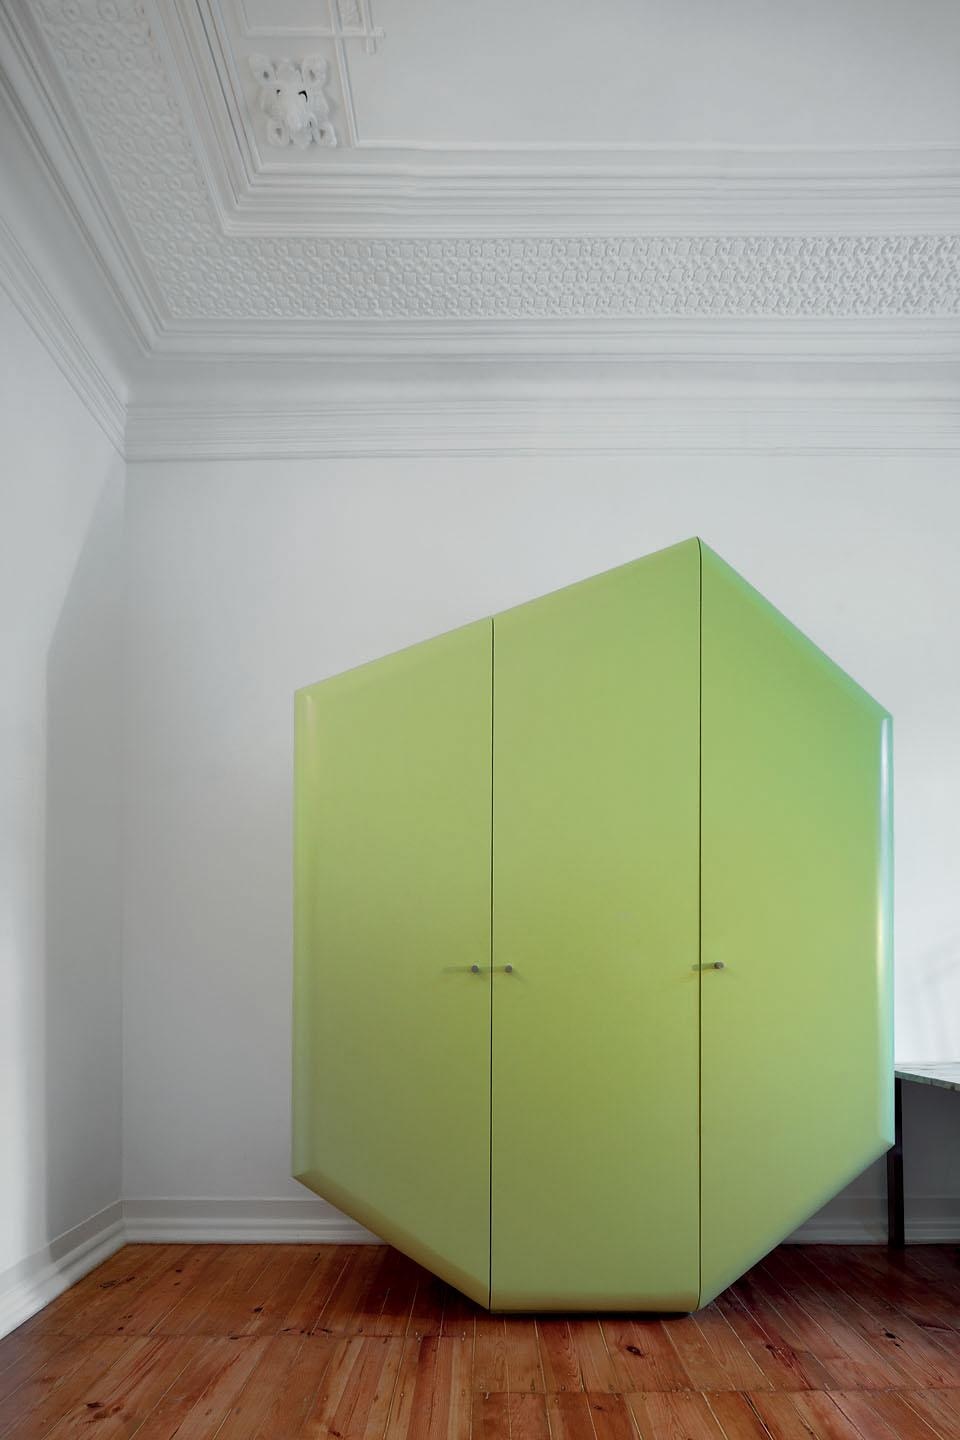 Large mysterious objects
scattered around the house
bring a theatrical effect
to the existing space and
provide essential functions such
as the wardrobe between the
two children’s bedrooms.